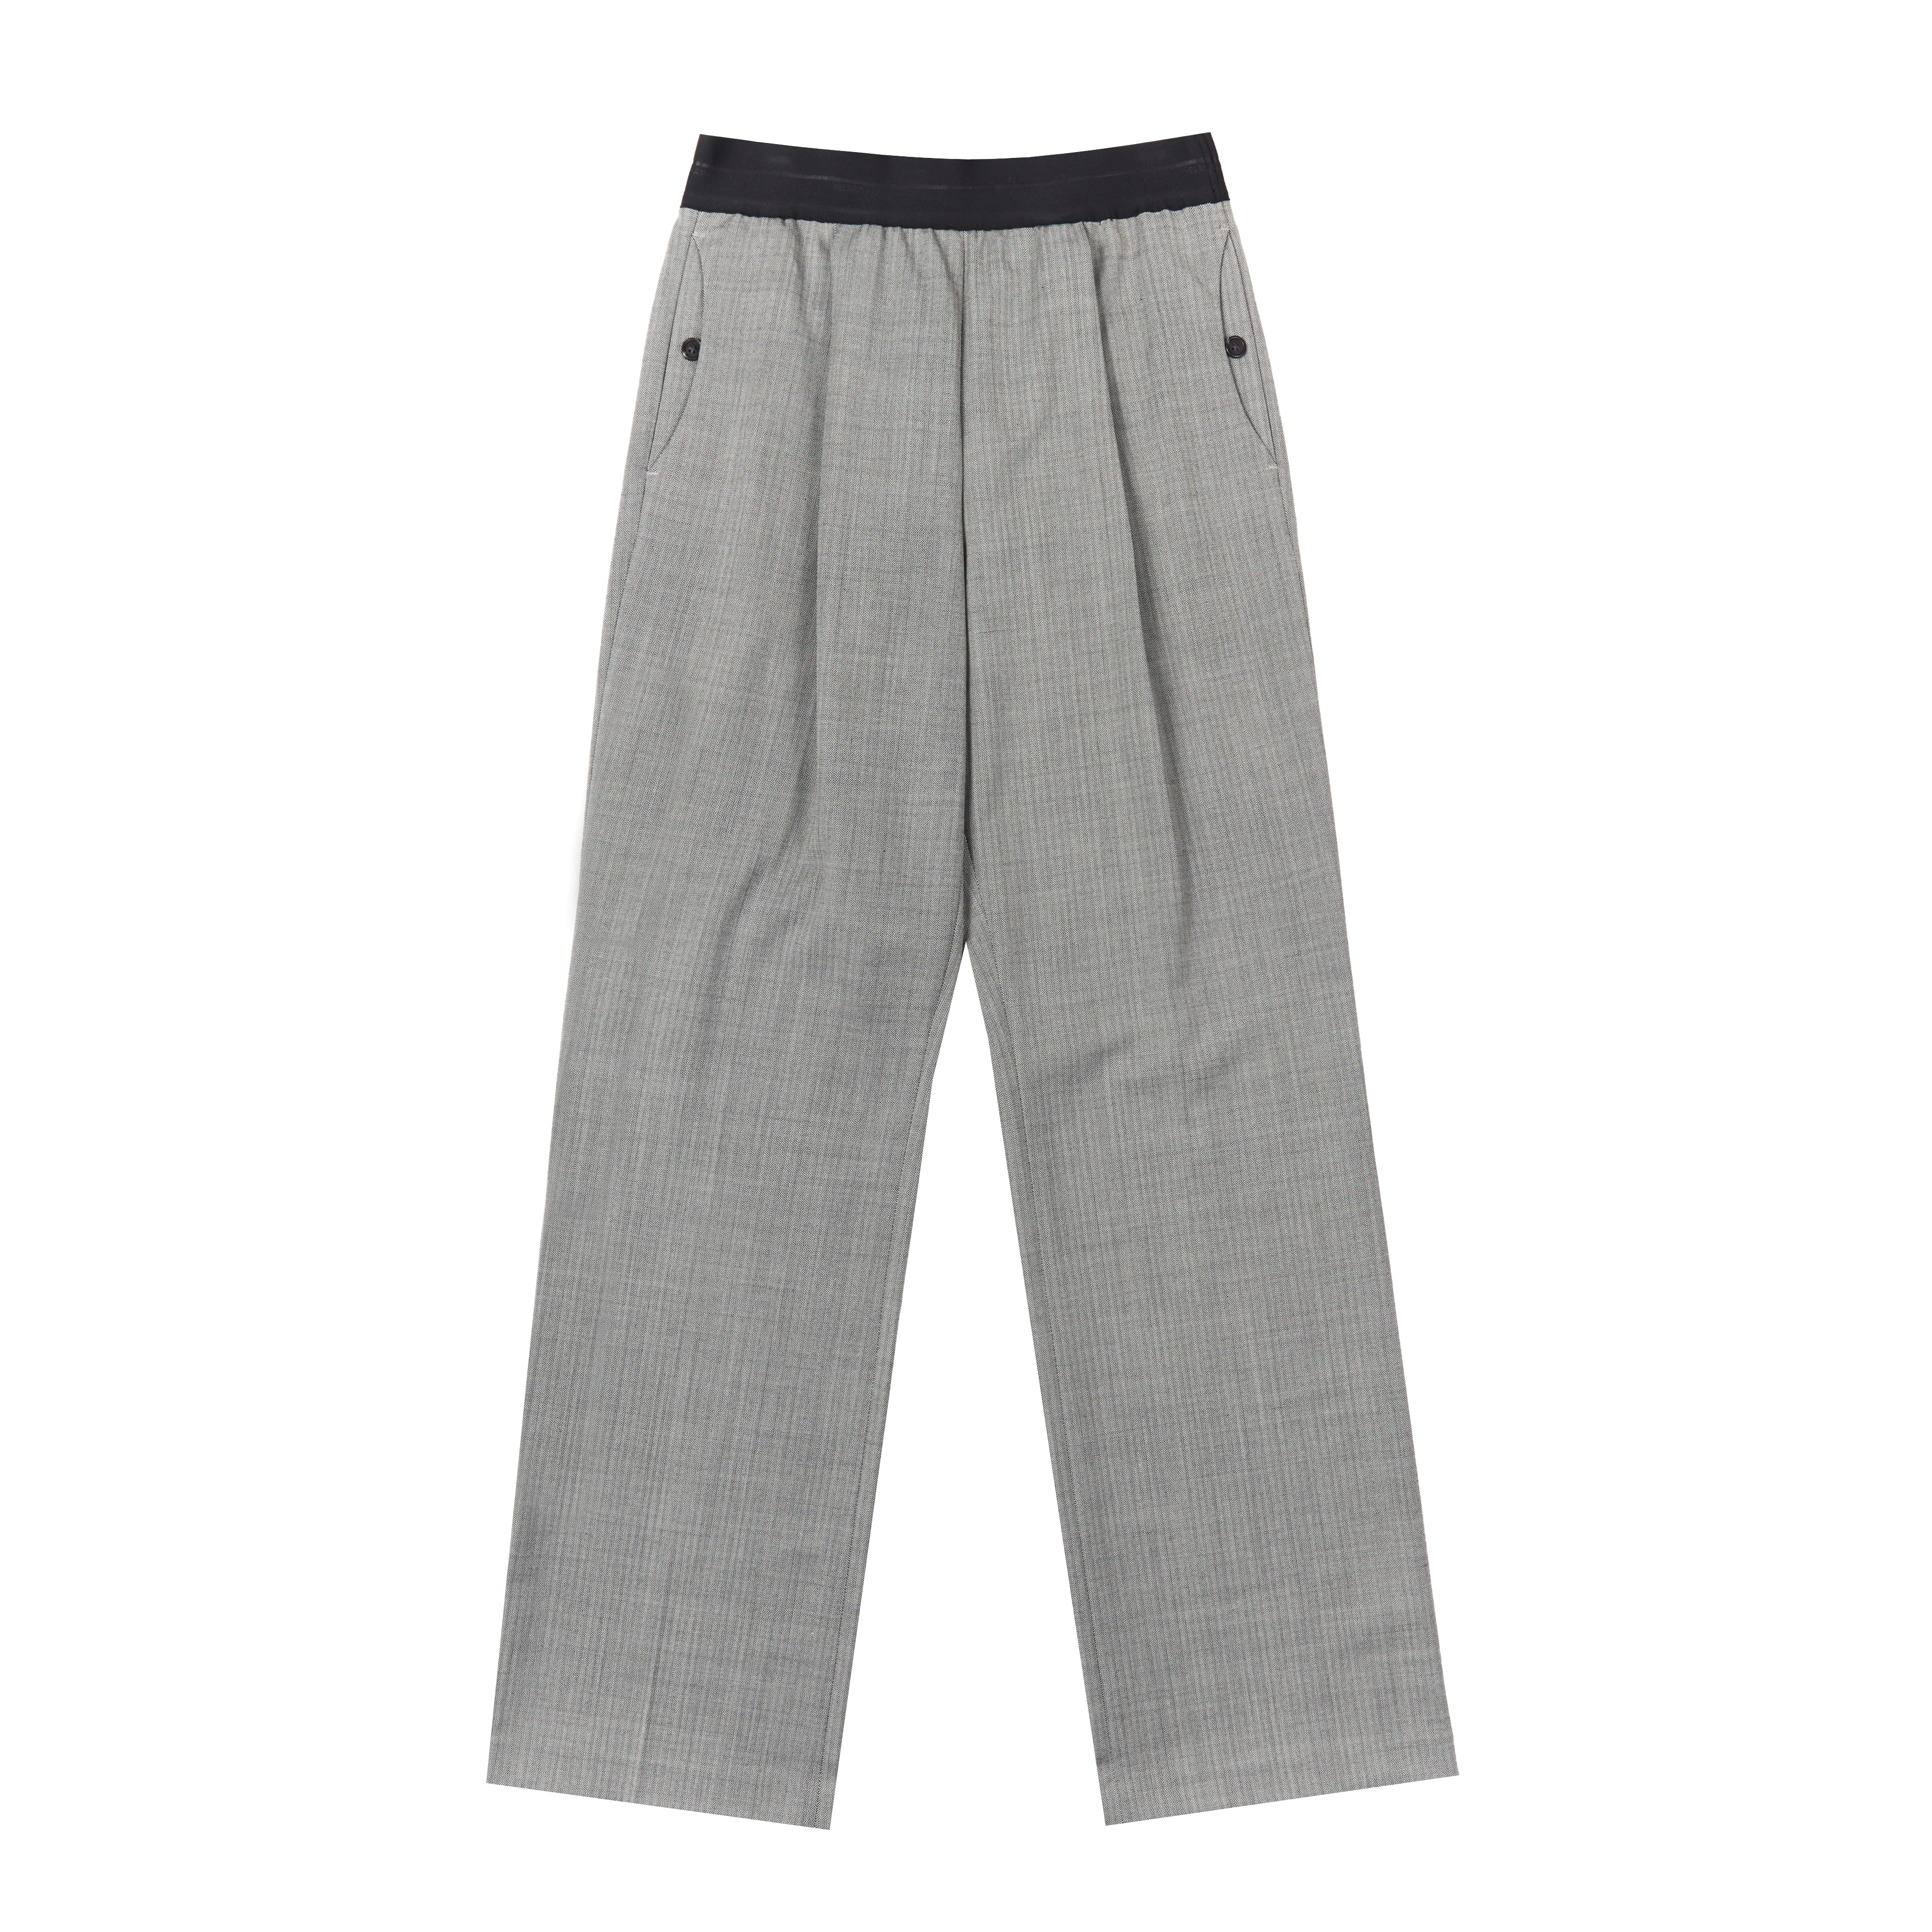 HELMUT LANG TROUSERS WITH LOGO PULL ON ELASTIC BAND WAIST GRAY